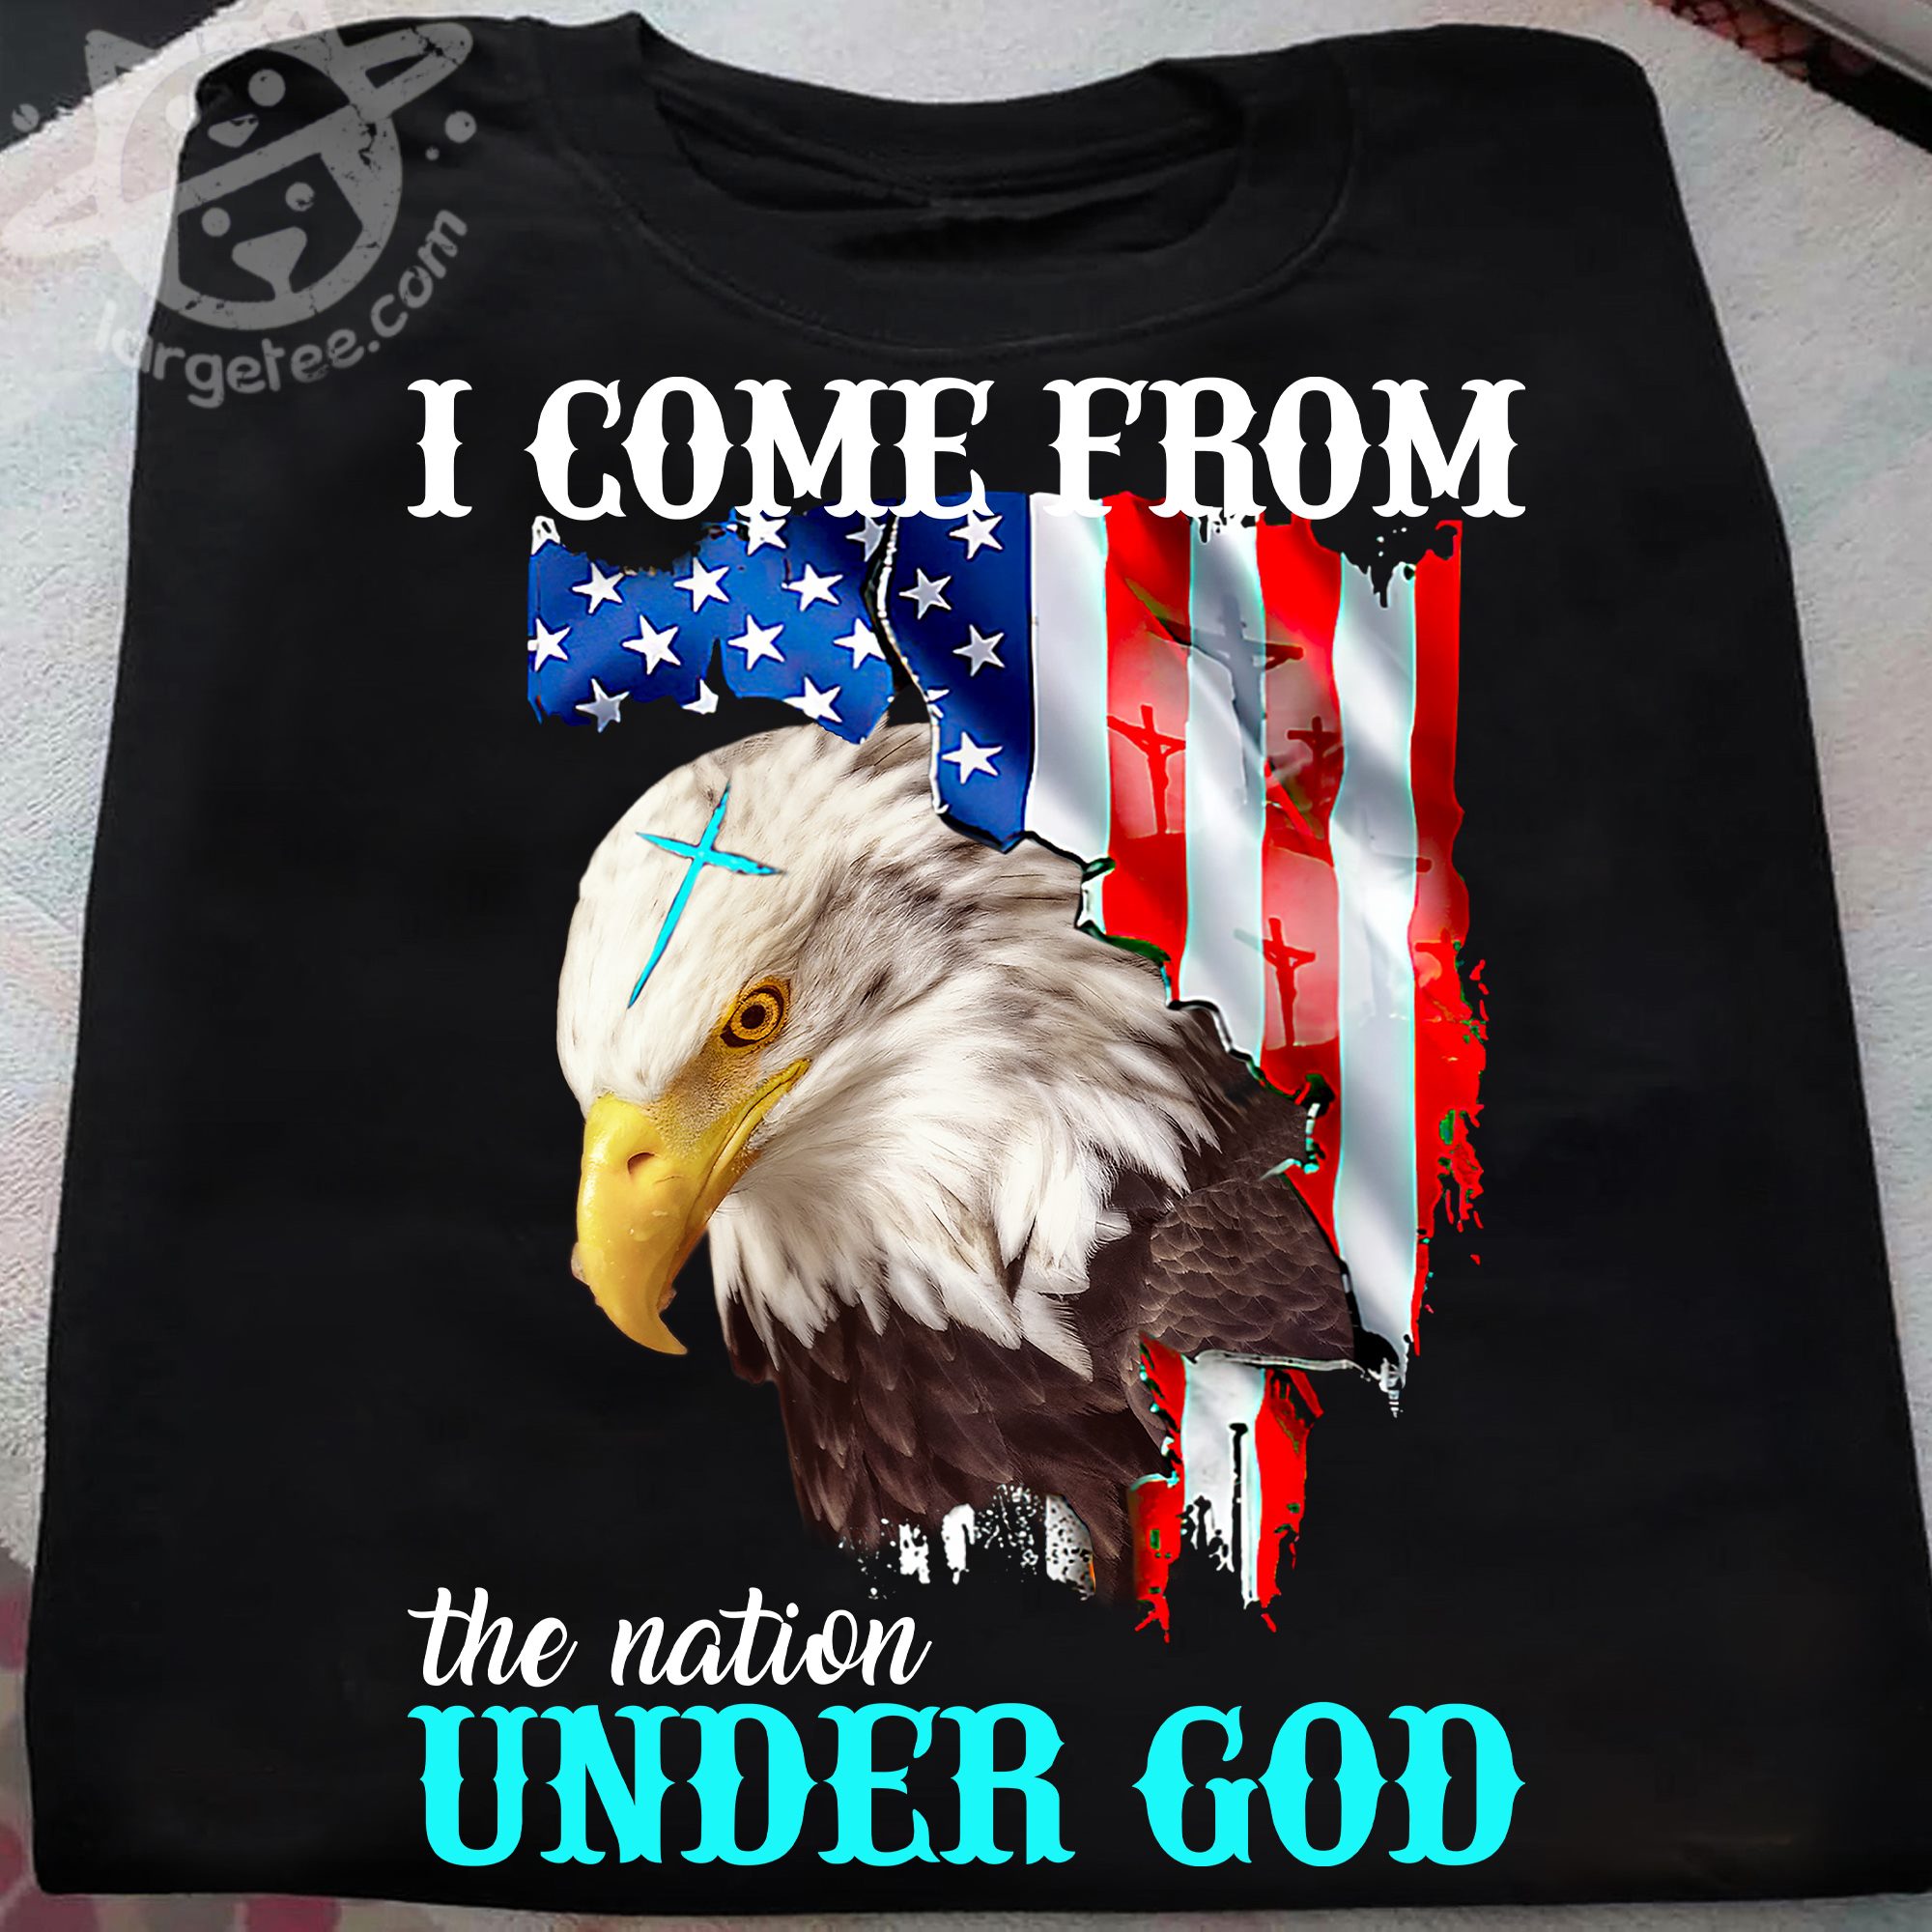 I come from the nation under god - America flag and eagle